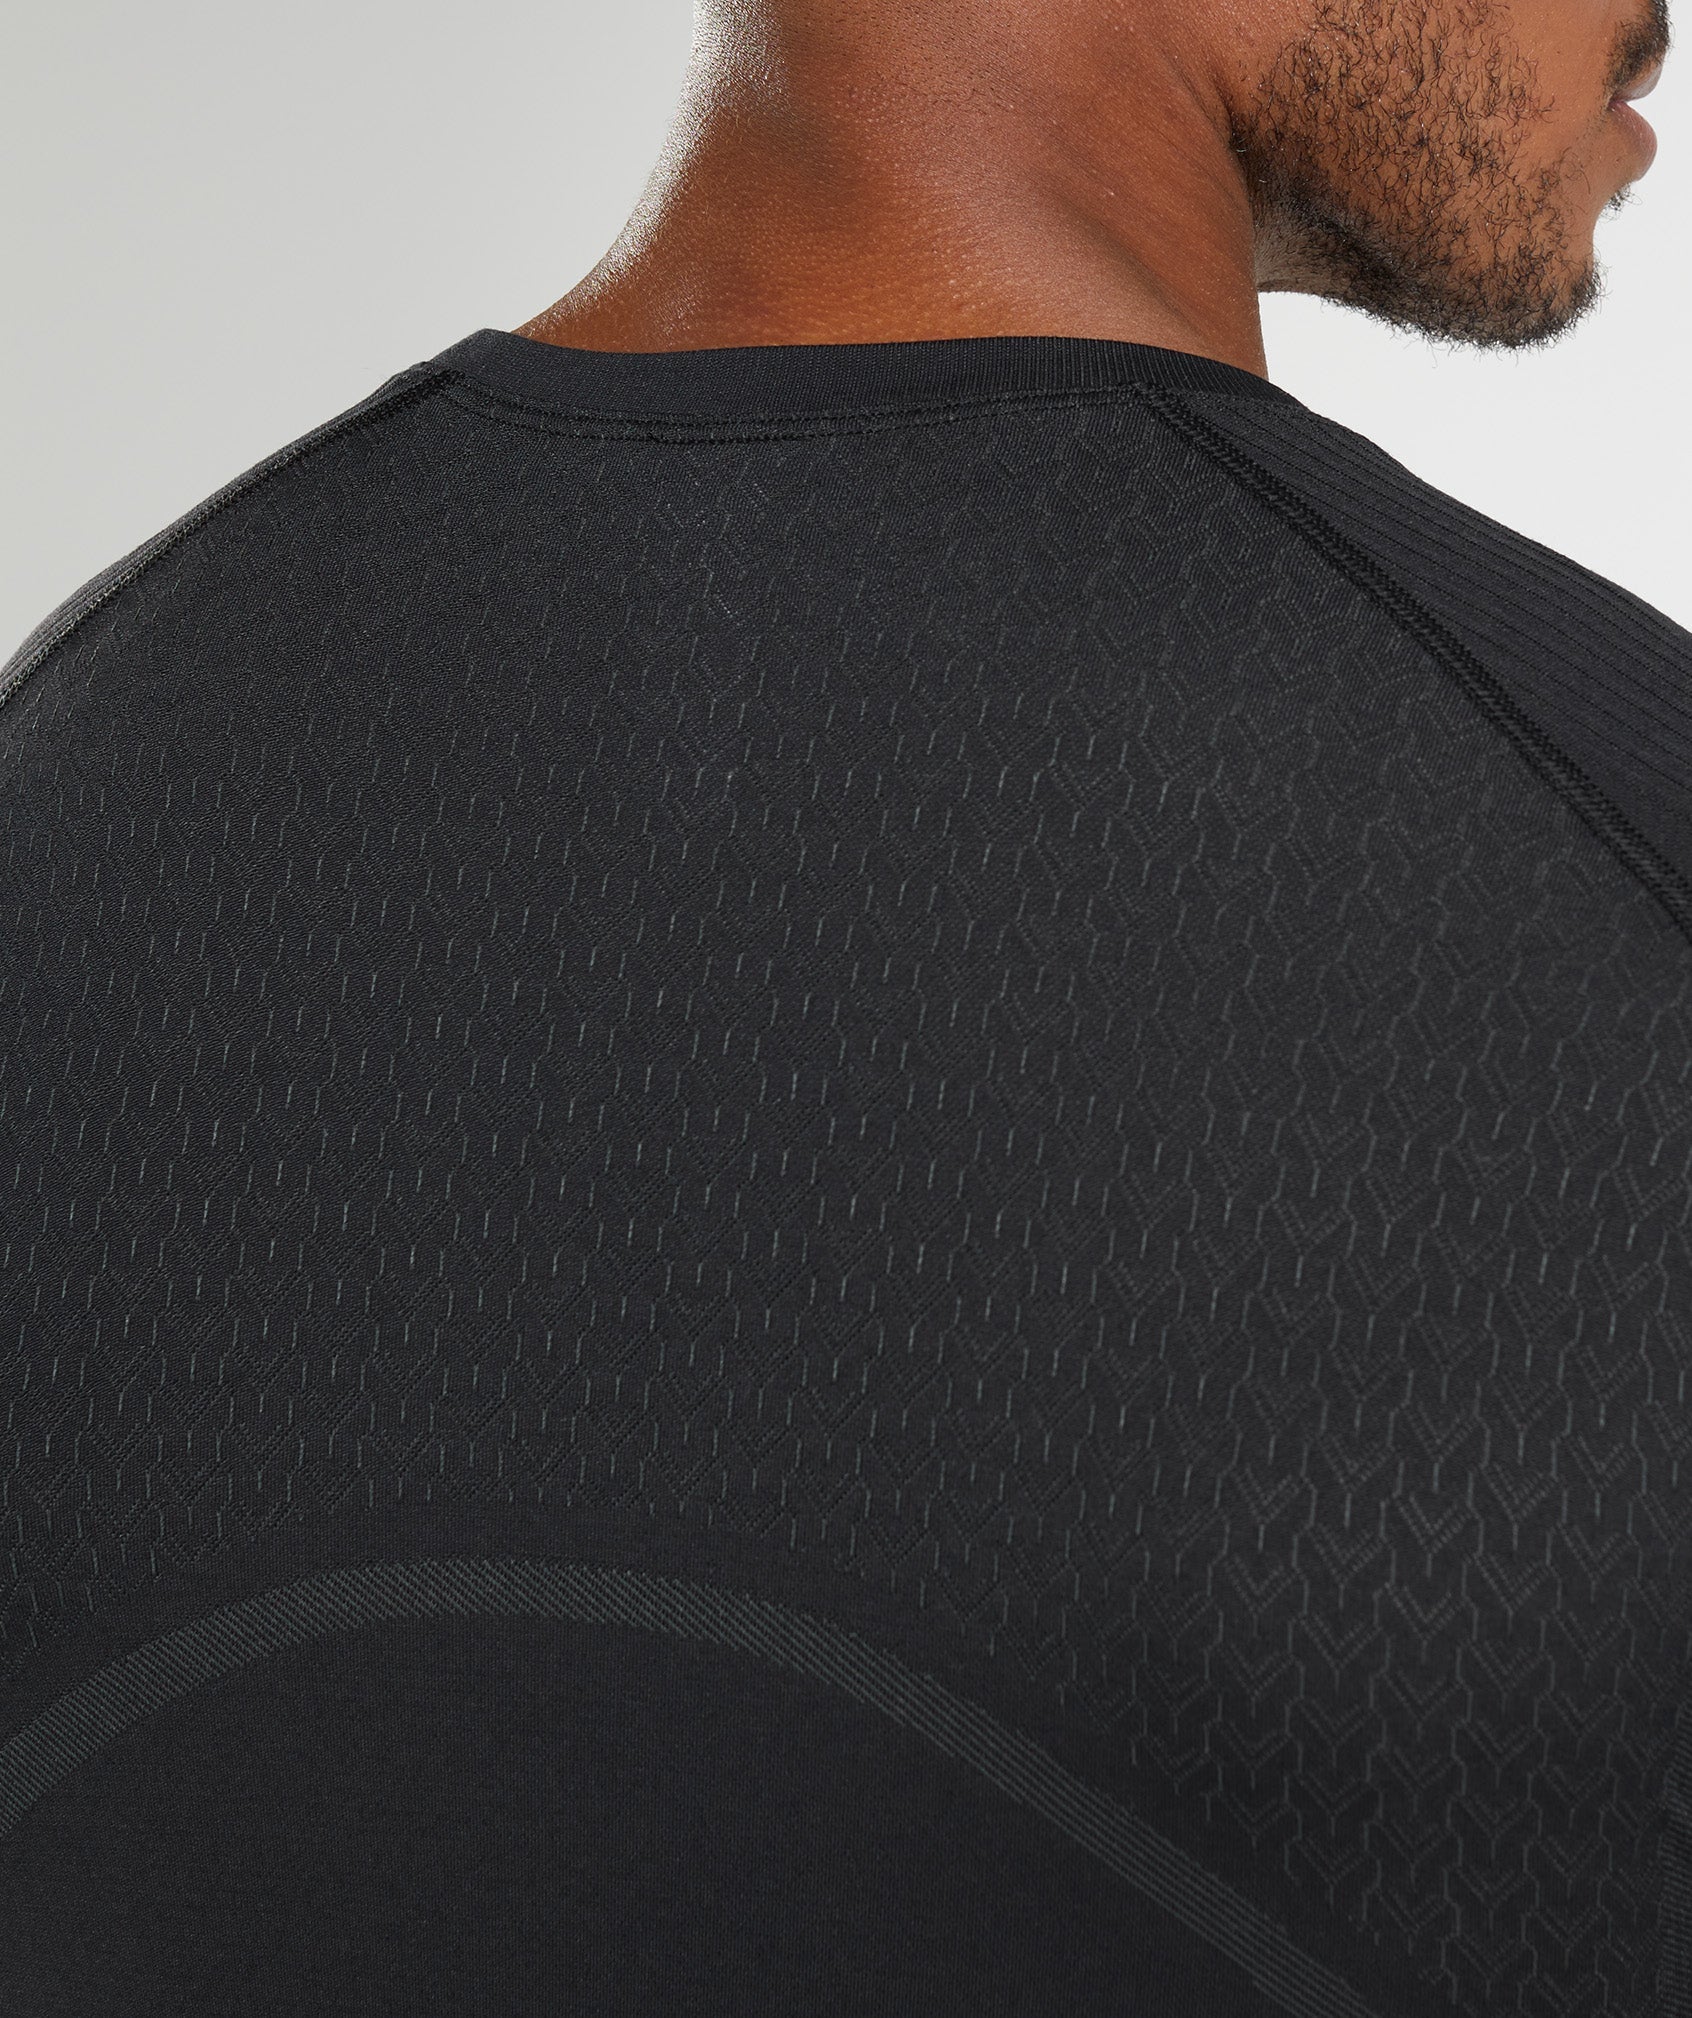 315 Seamless T-Shirt in Black - view 6